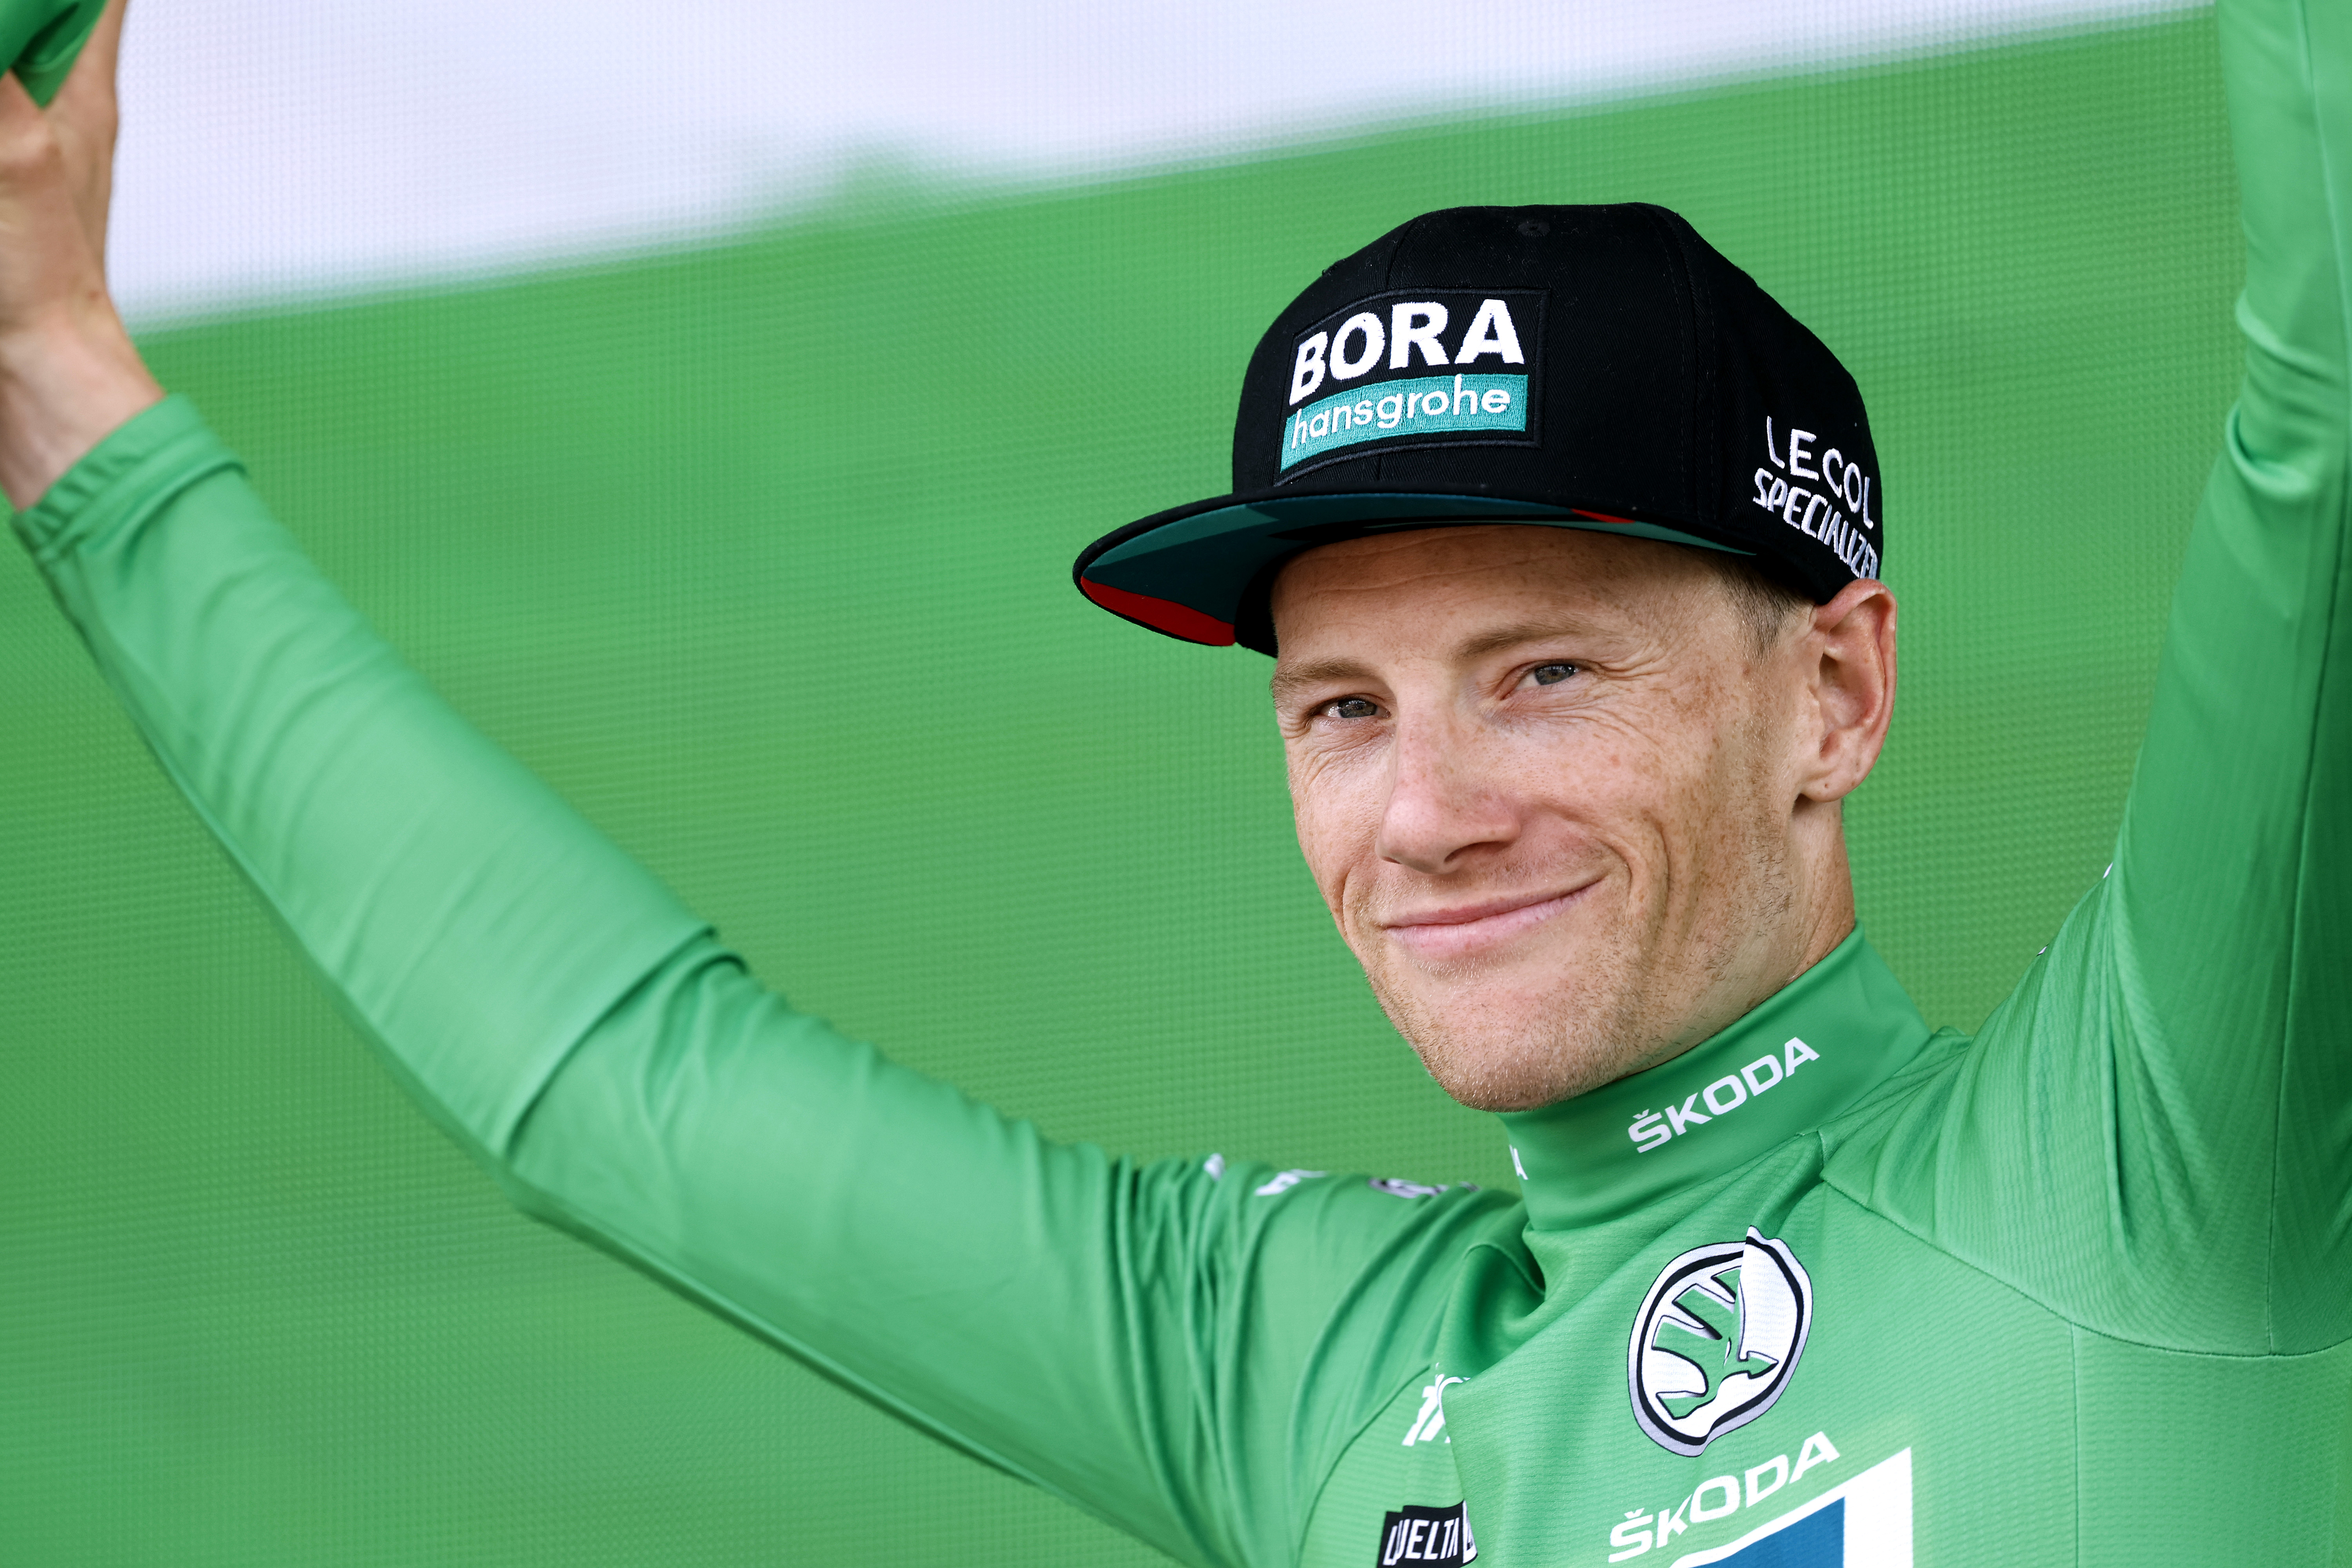 Tour de France hero Sam Bennett poses in gorgeous pictures with